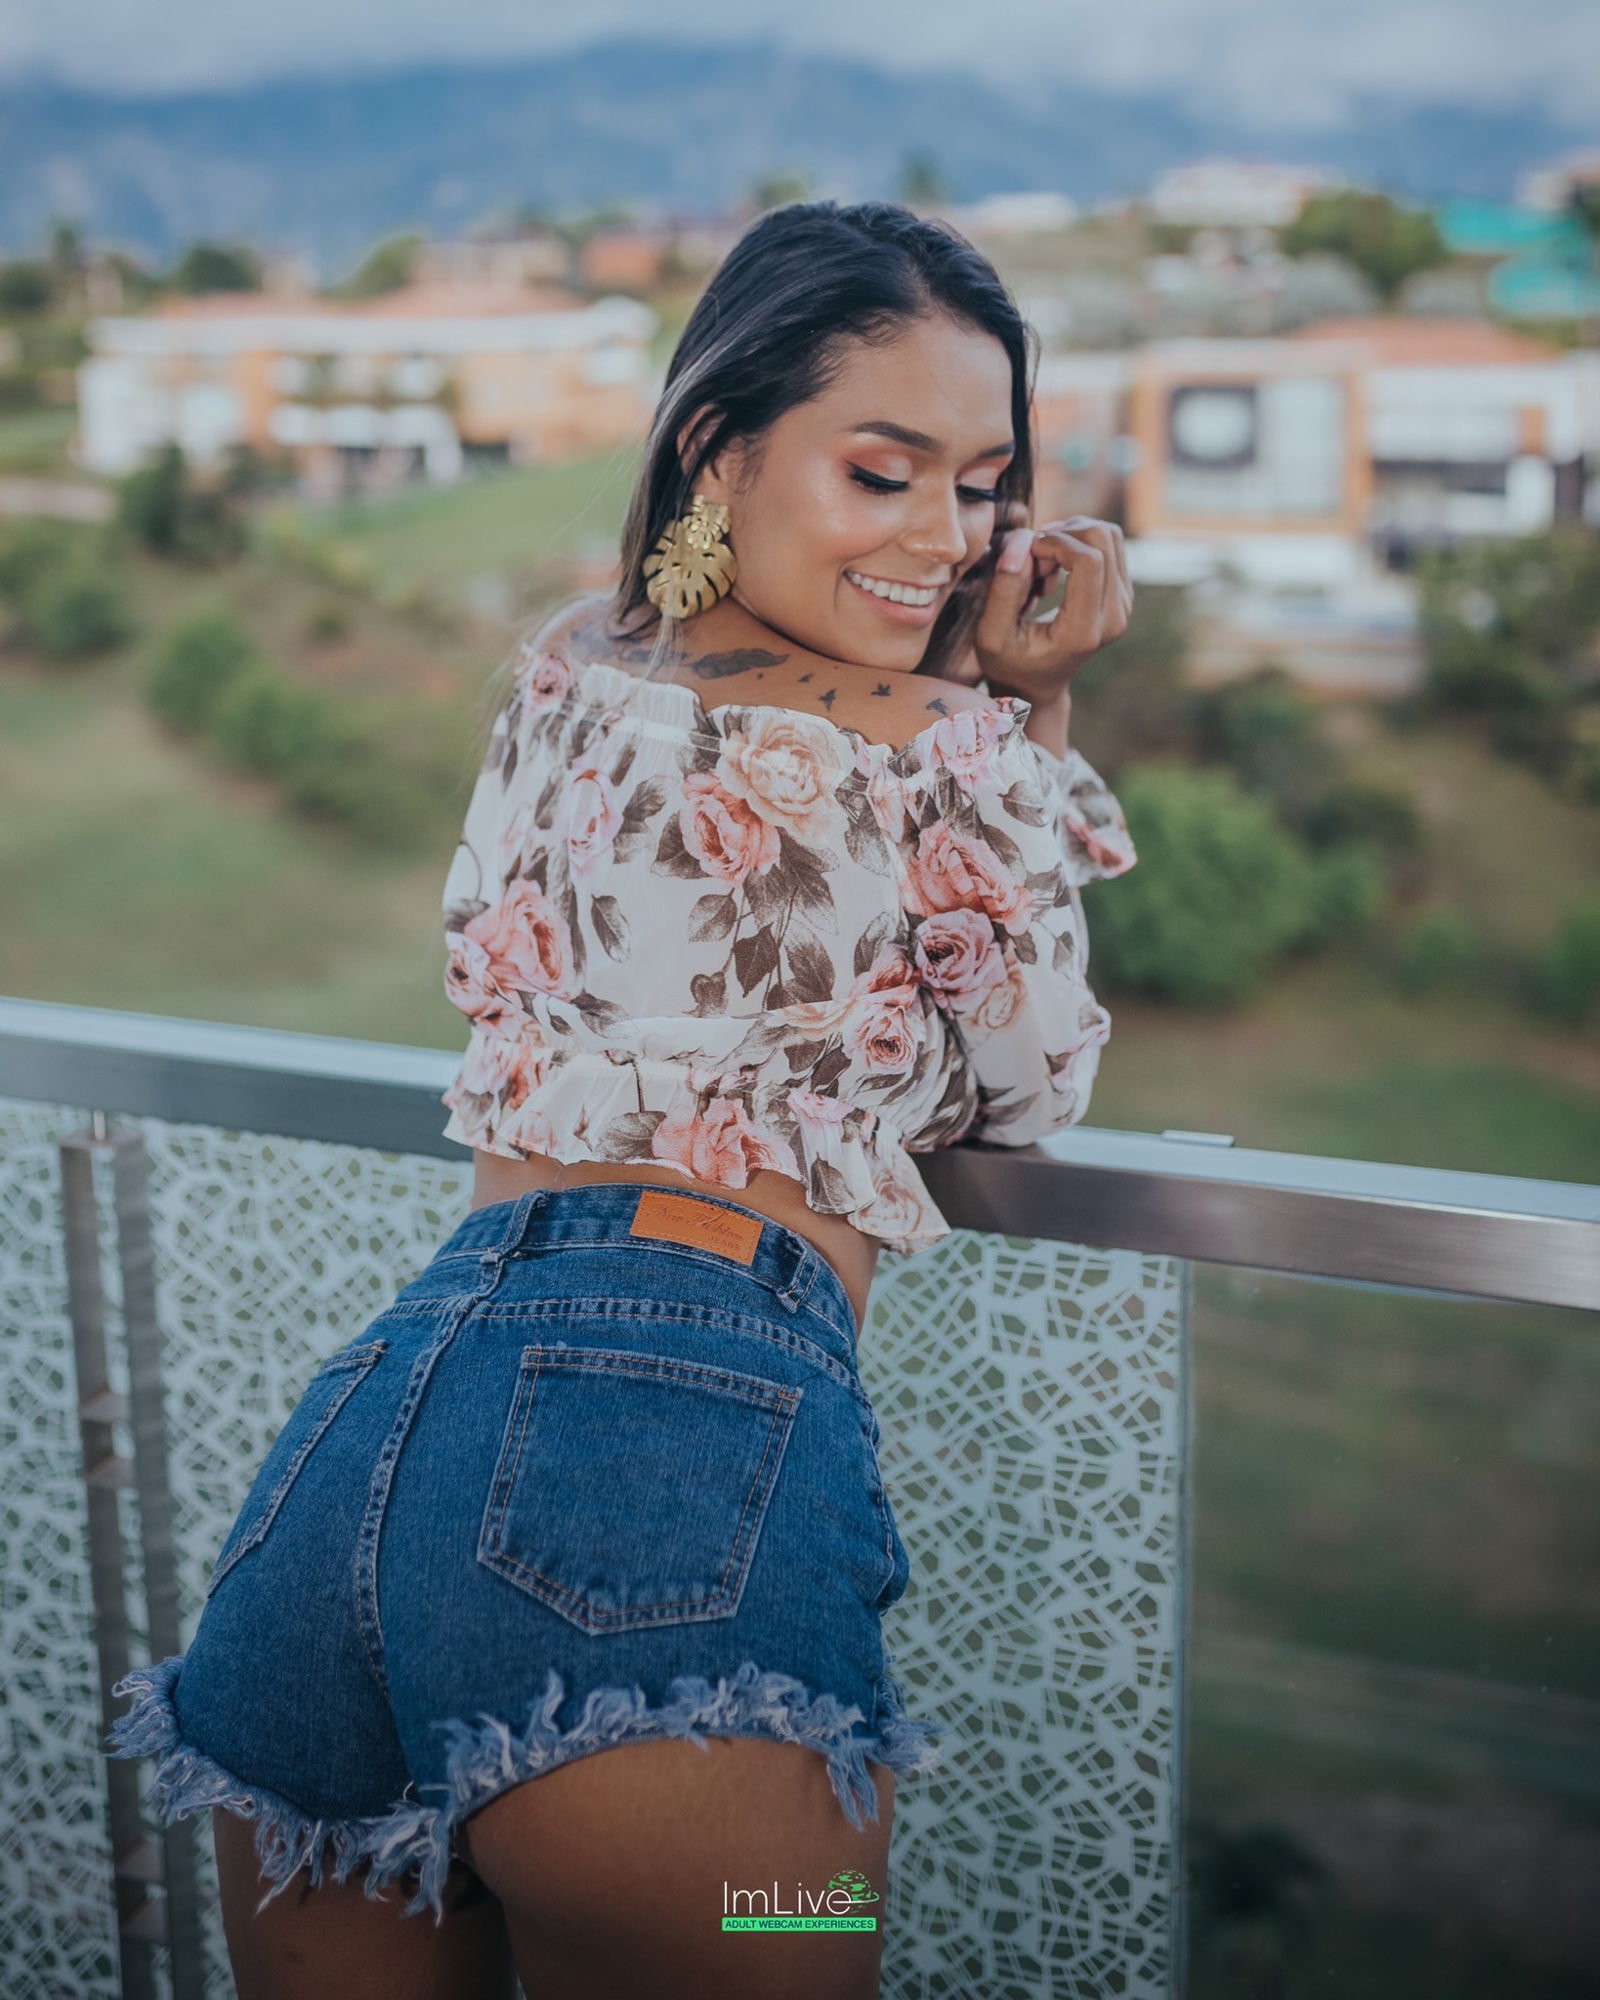 Photo by ImLive with the username @imlivenet, who is a brand user,  October 8, 2020 at 5:55 PM. The post is about the topic Latinas and the text says 'What a view! Stay stunned for #ariisugar and be sure to follow her on ImLive. 😜

👉 http://imlurl.com/4Bhyvu 

[#imliveonImlive #pornlive #livecam #chatlive #stayhomedontdate #Ass #Sexy #porn #webcam #horny #pornovideo #pornogirl #porno #pornhub..'